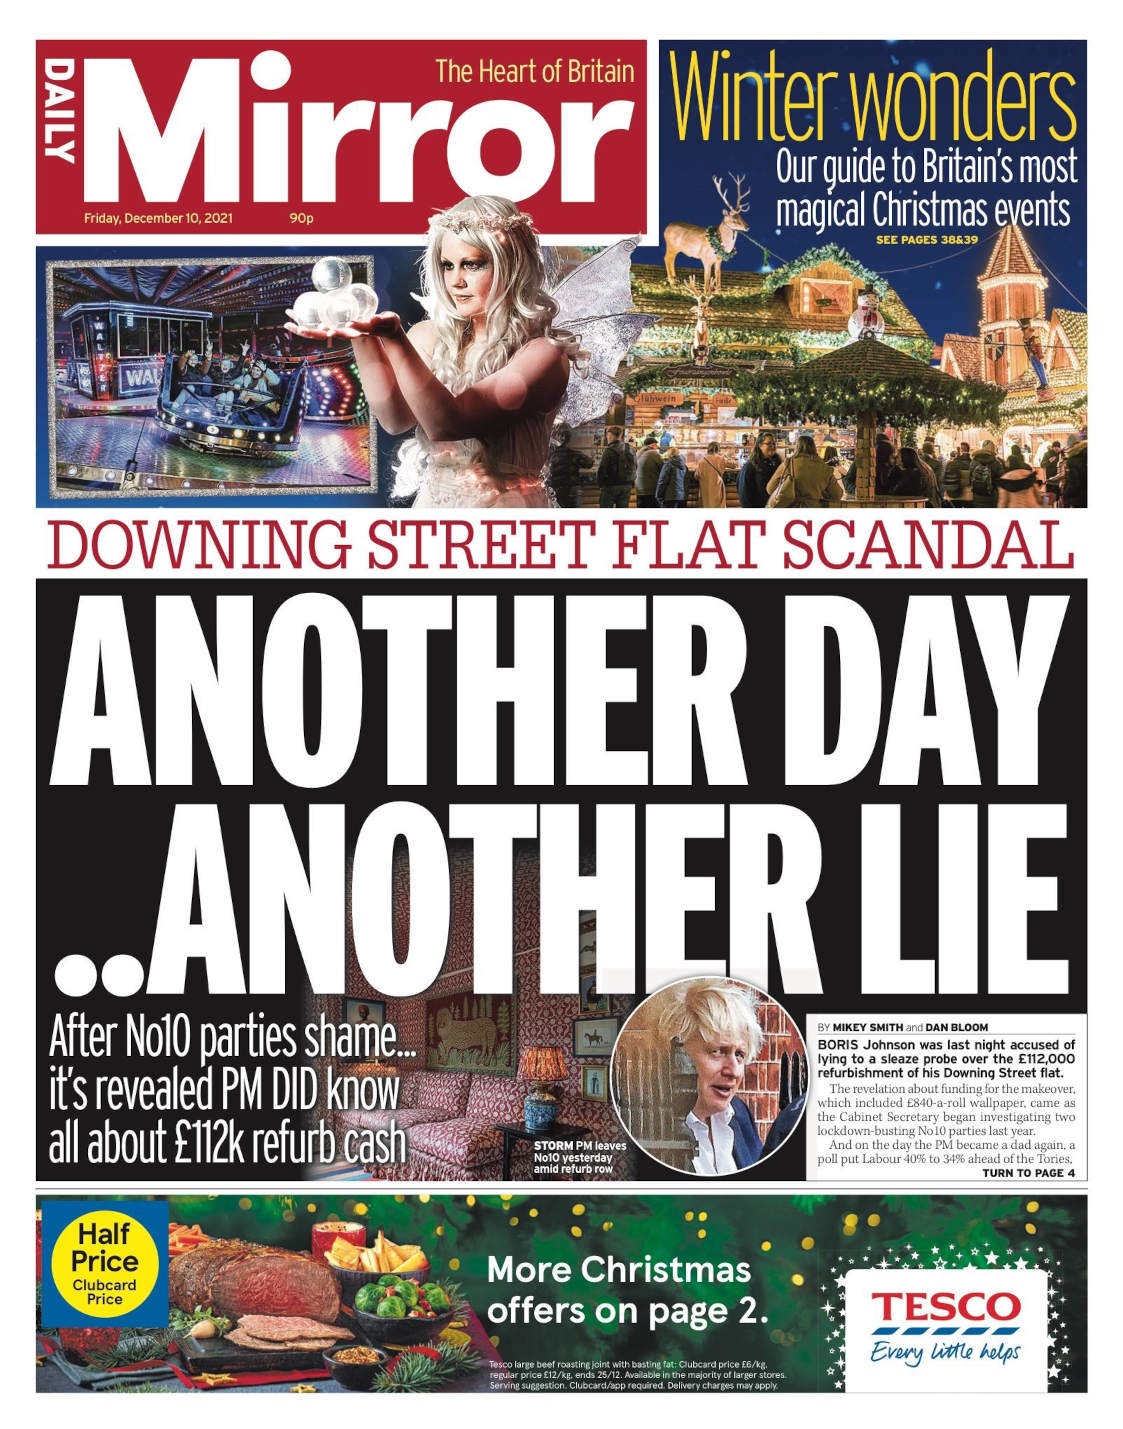 Daily Mirror, another day another lie